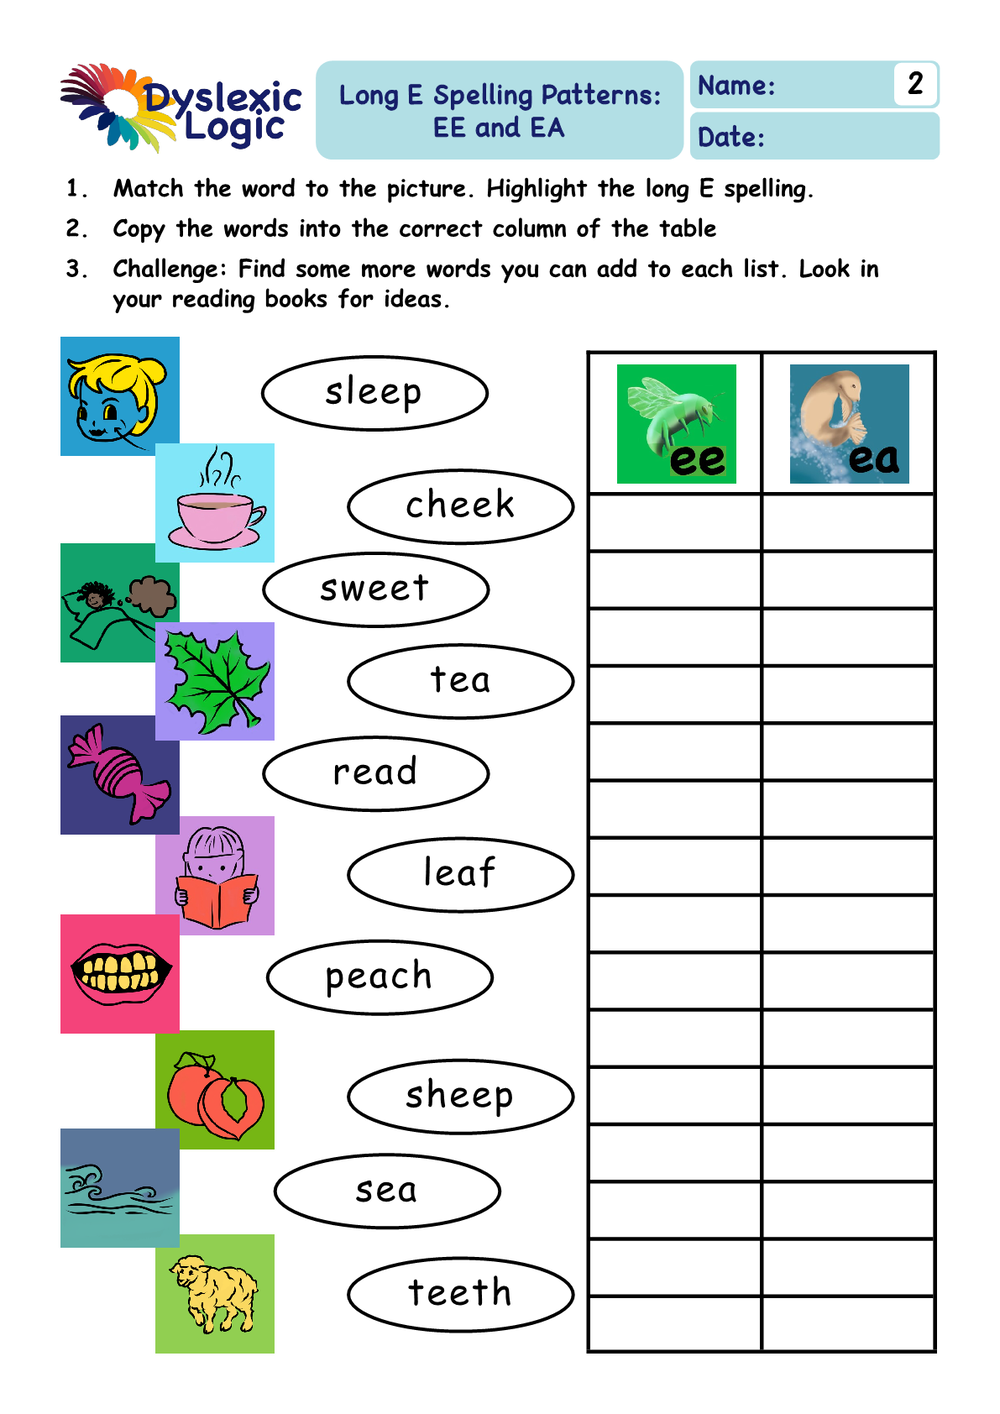 printable-phonics-support-resources-dyslexic-logic